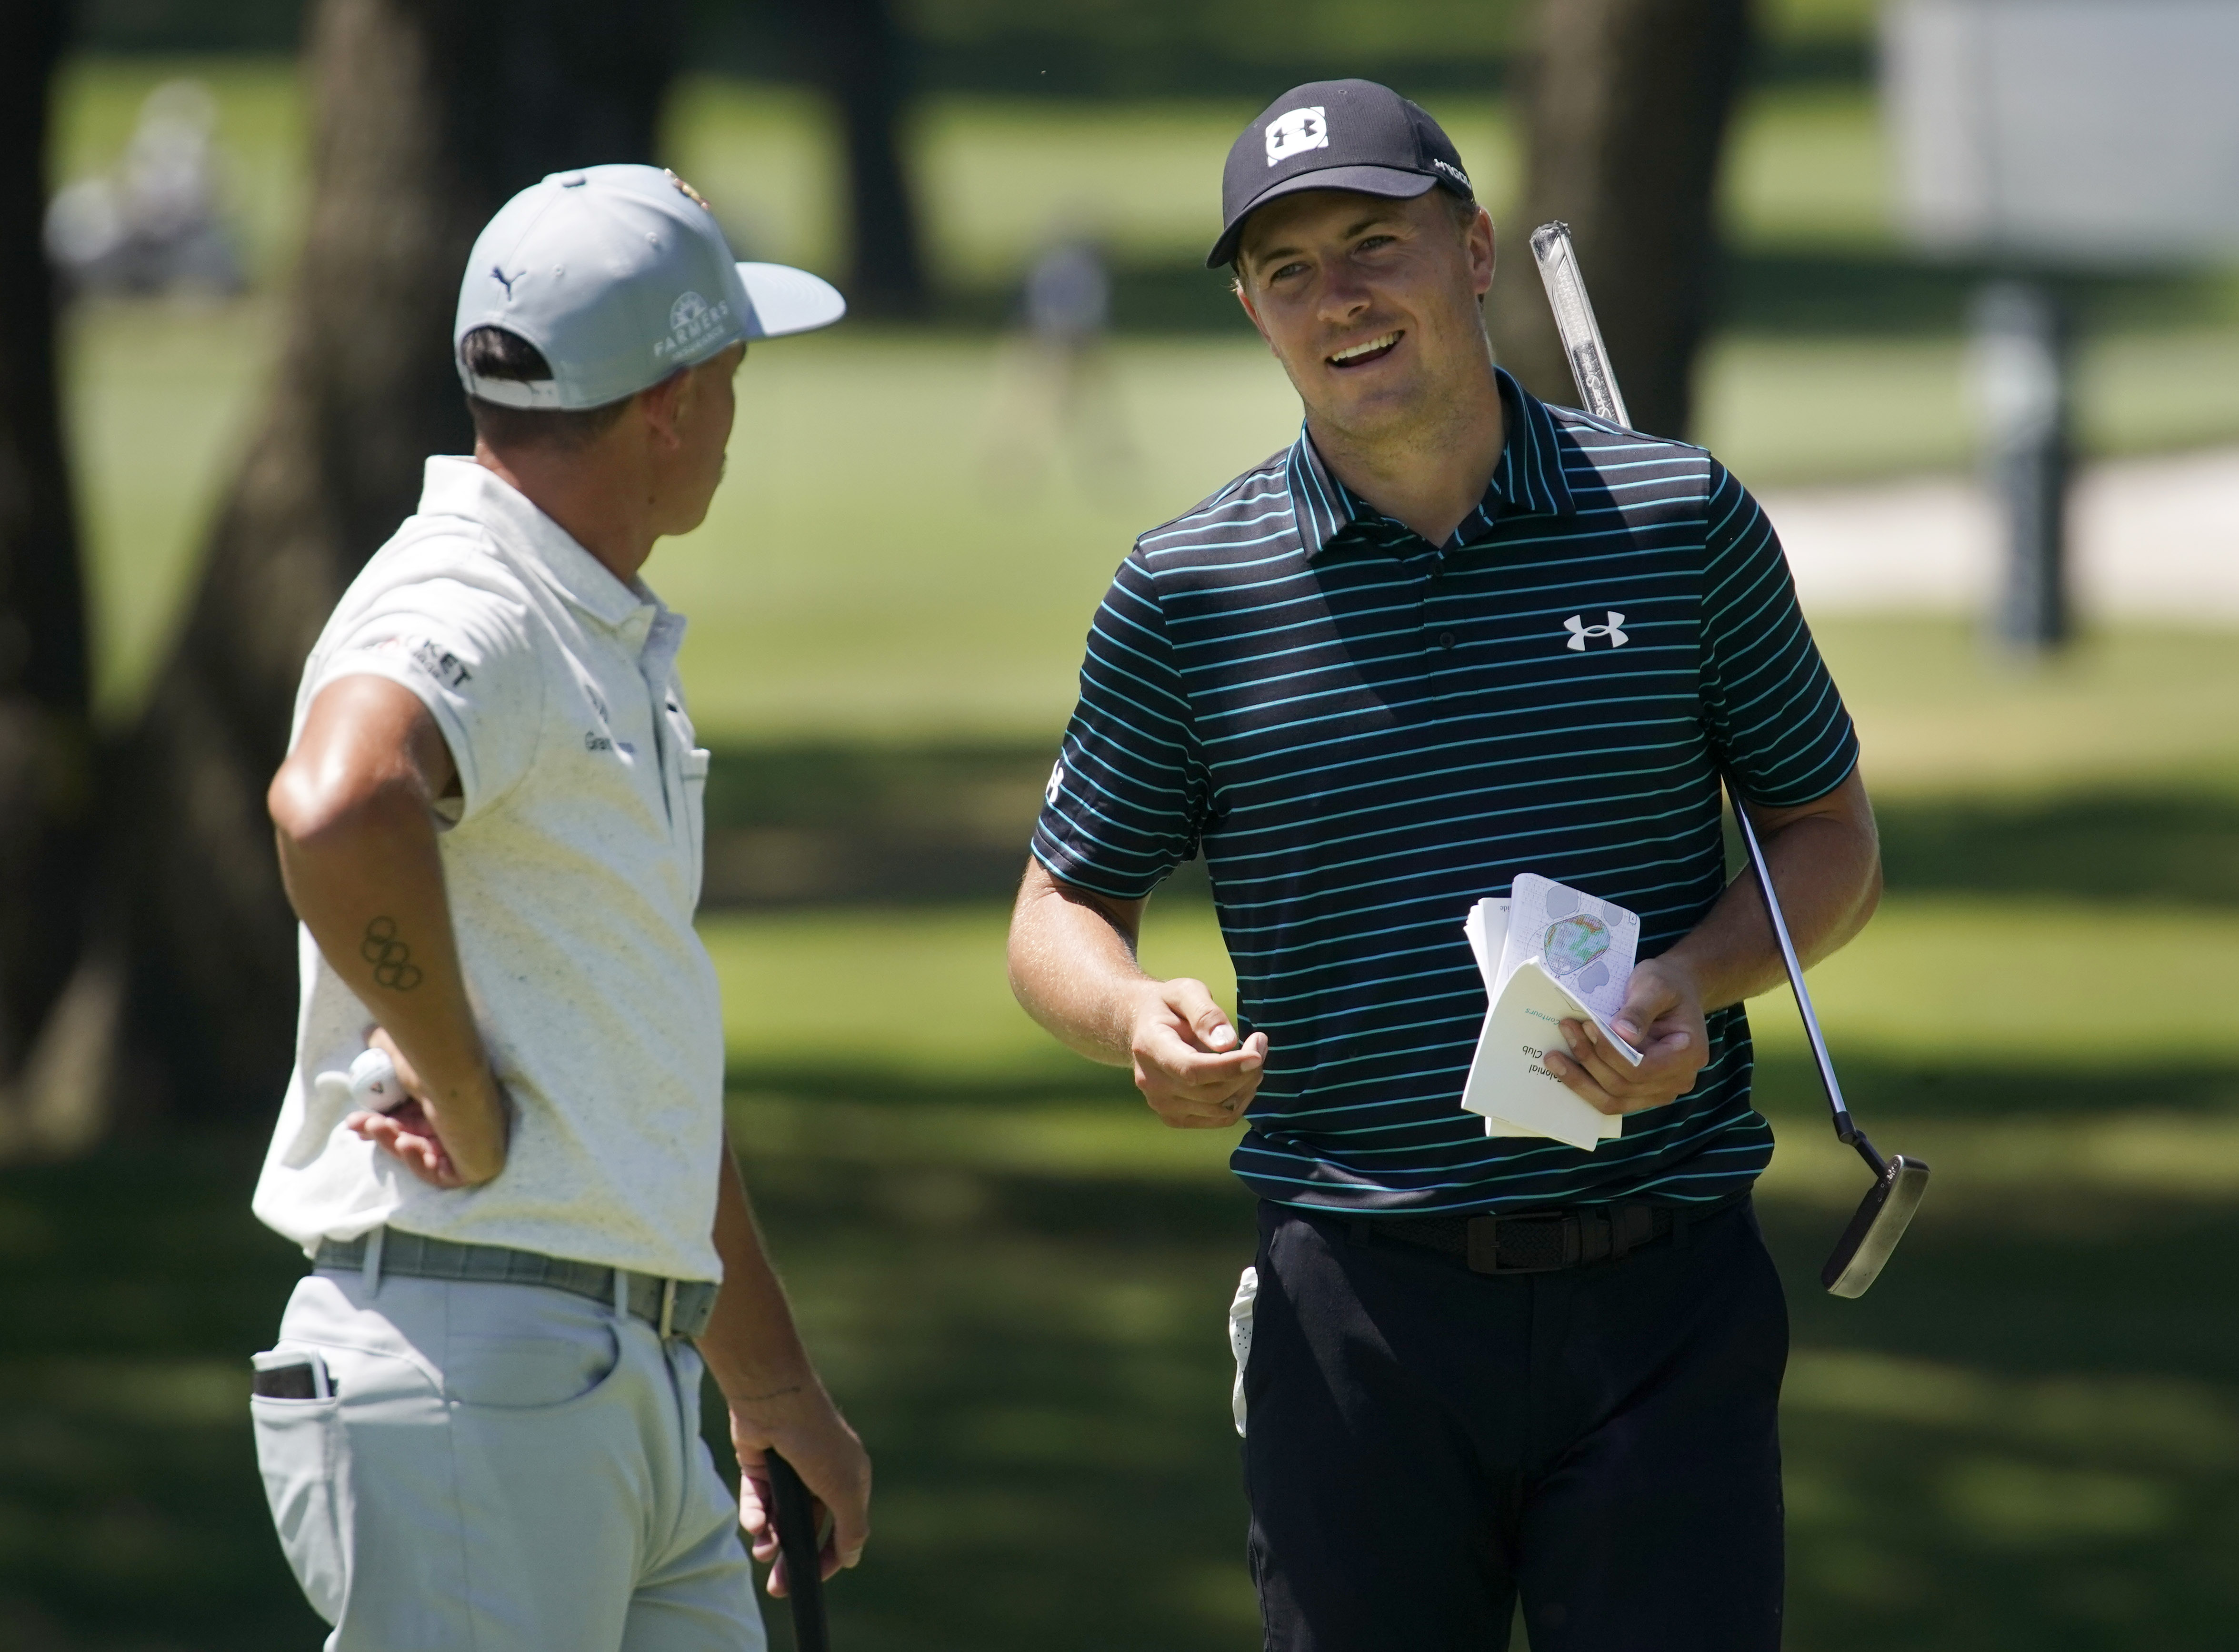 No fans? No problem Our live updates from the Charles Schwab Challenge at Colonial